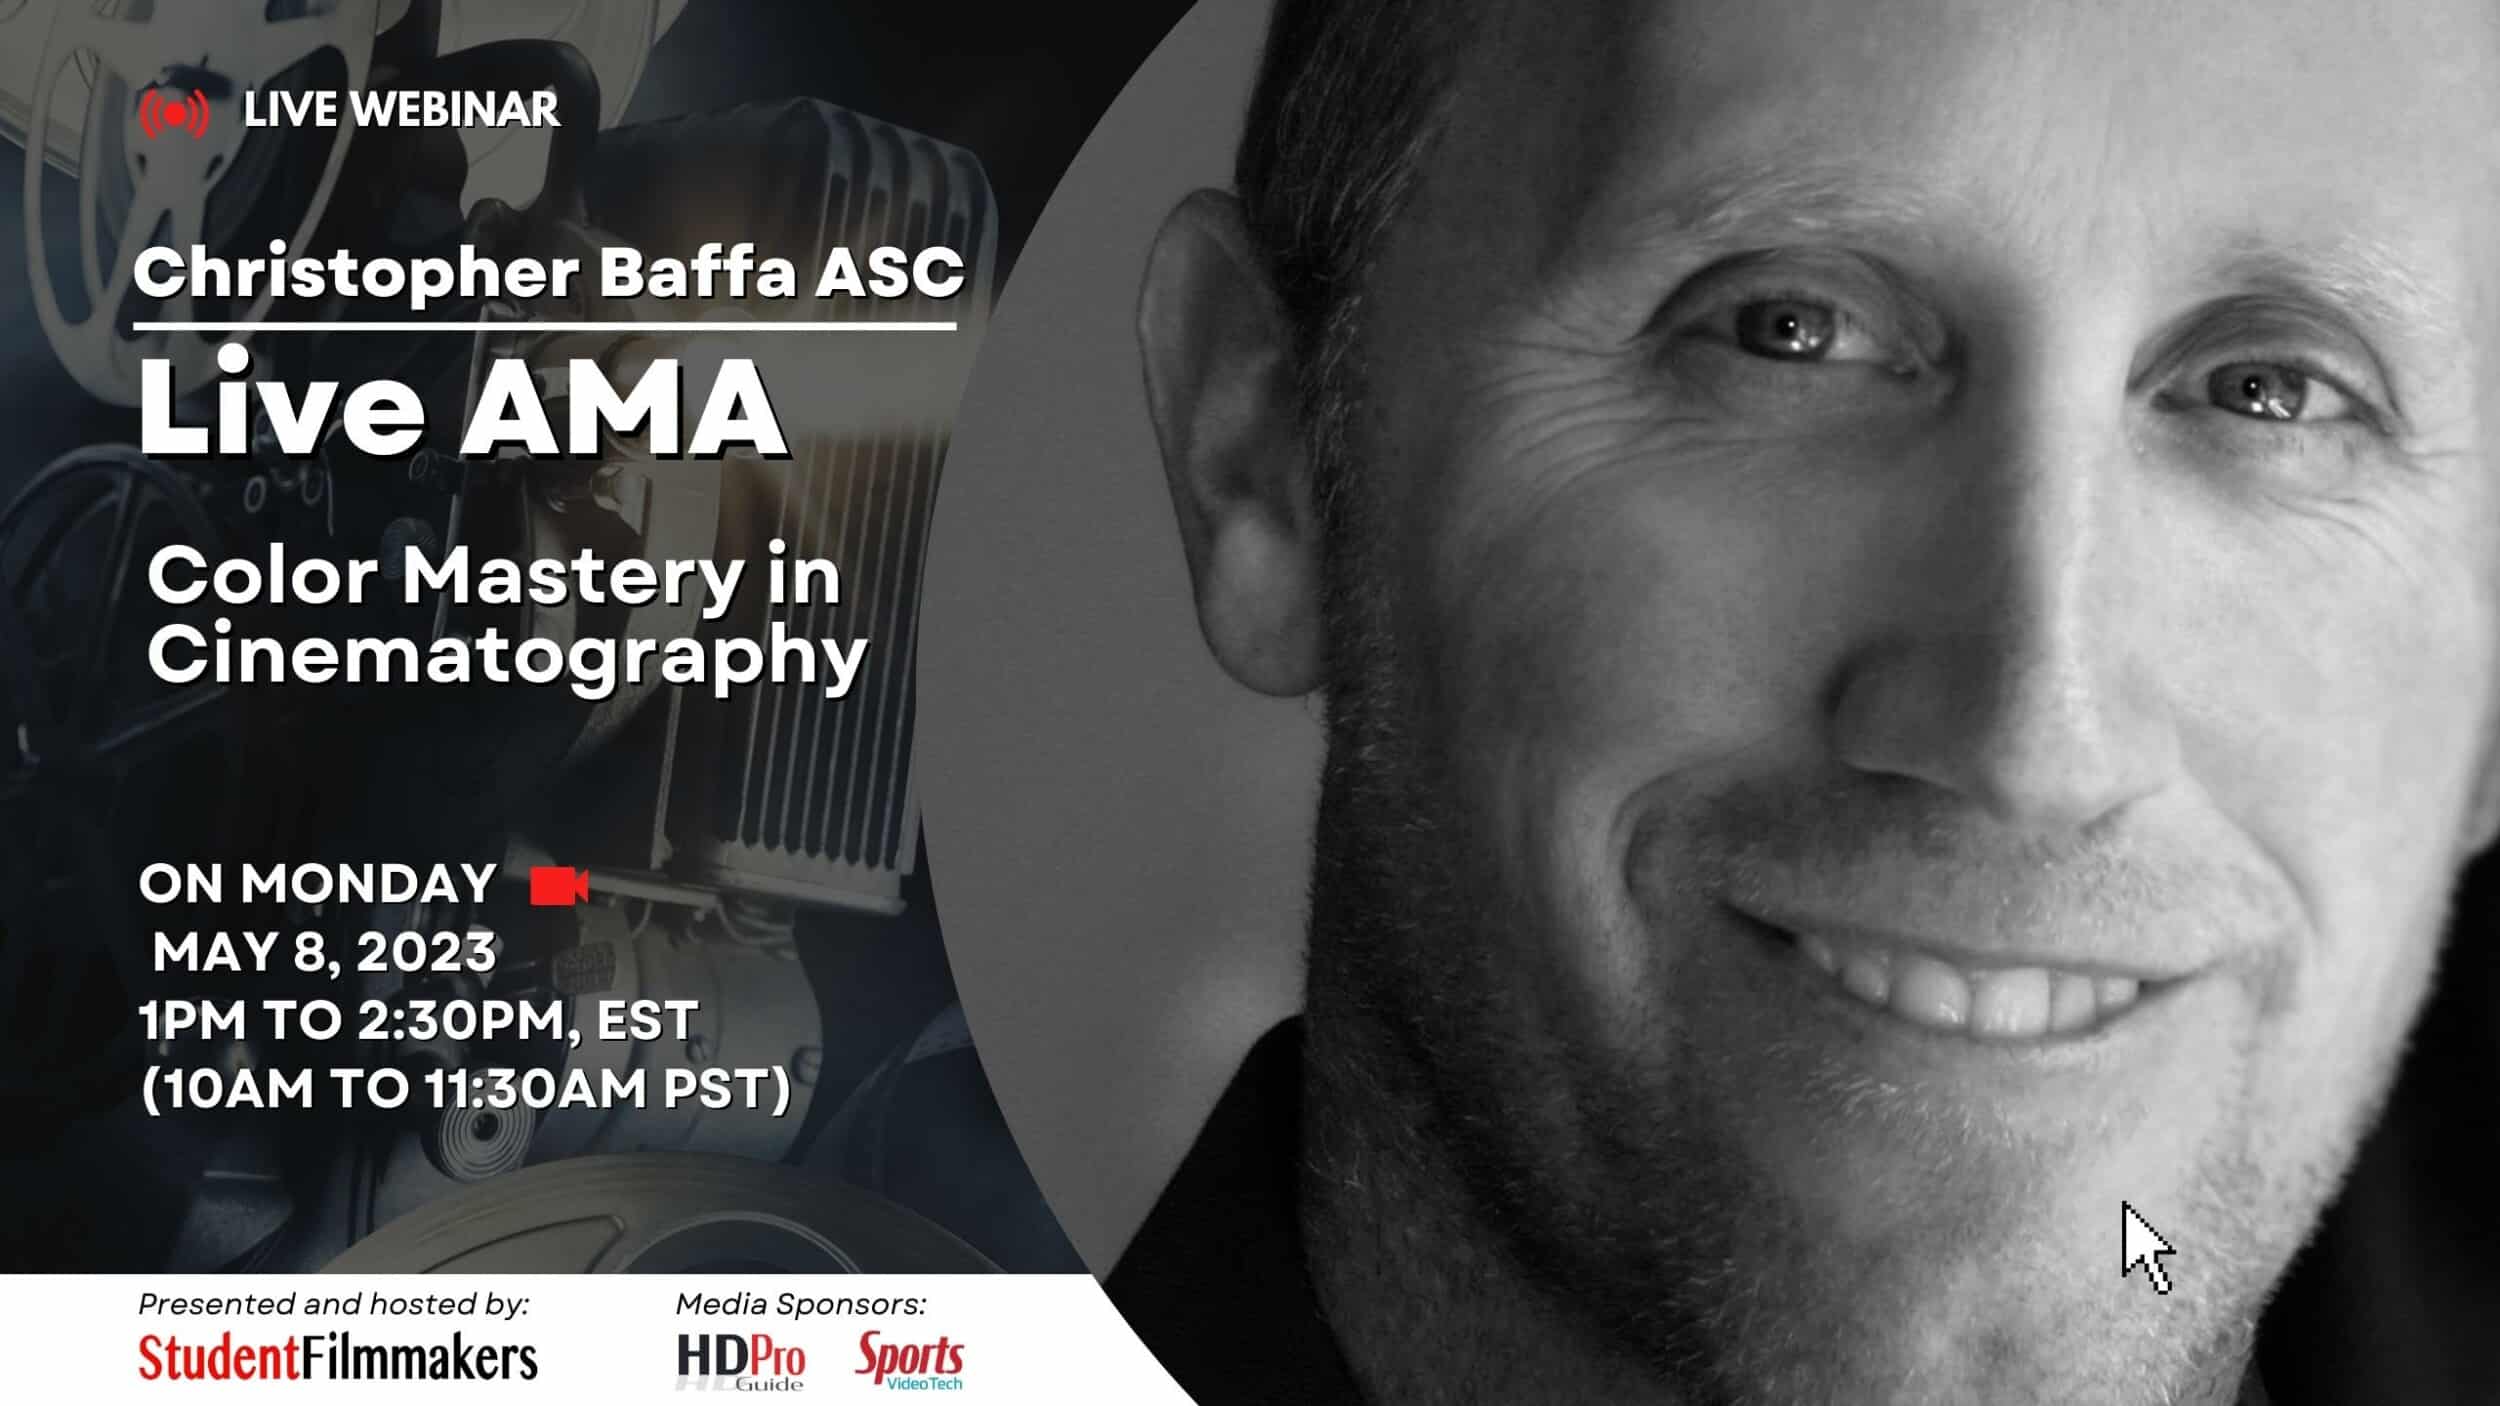 Webinar: Live AMA | Color Mastery in Cinematography with Christopher Baffa ASC: Crafting Mood, Tone, and Visual Imagery for Compelling Storytelling